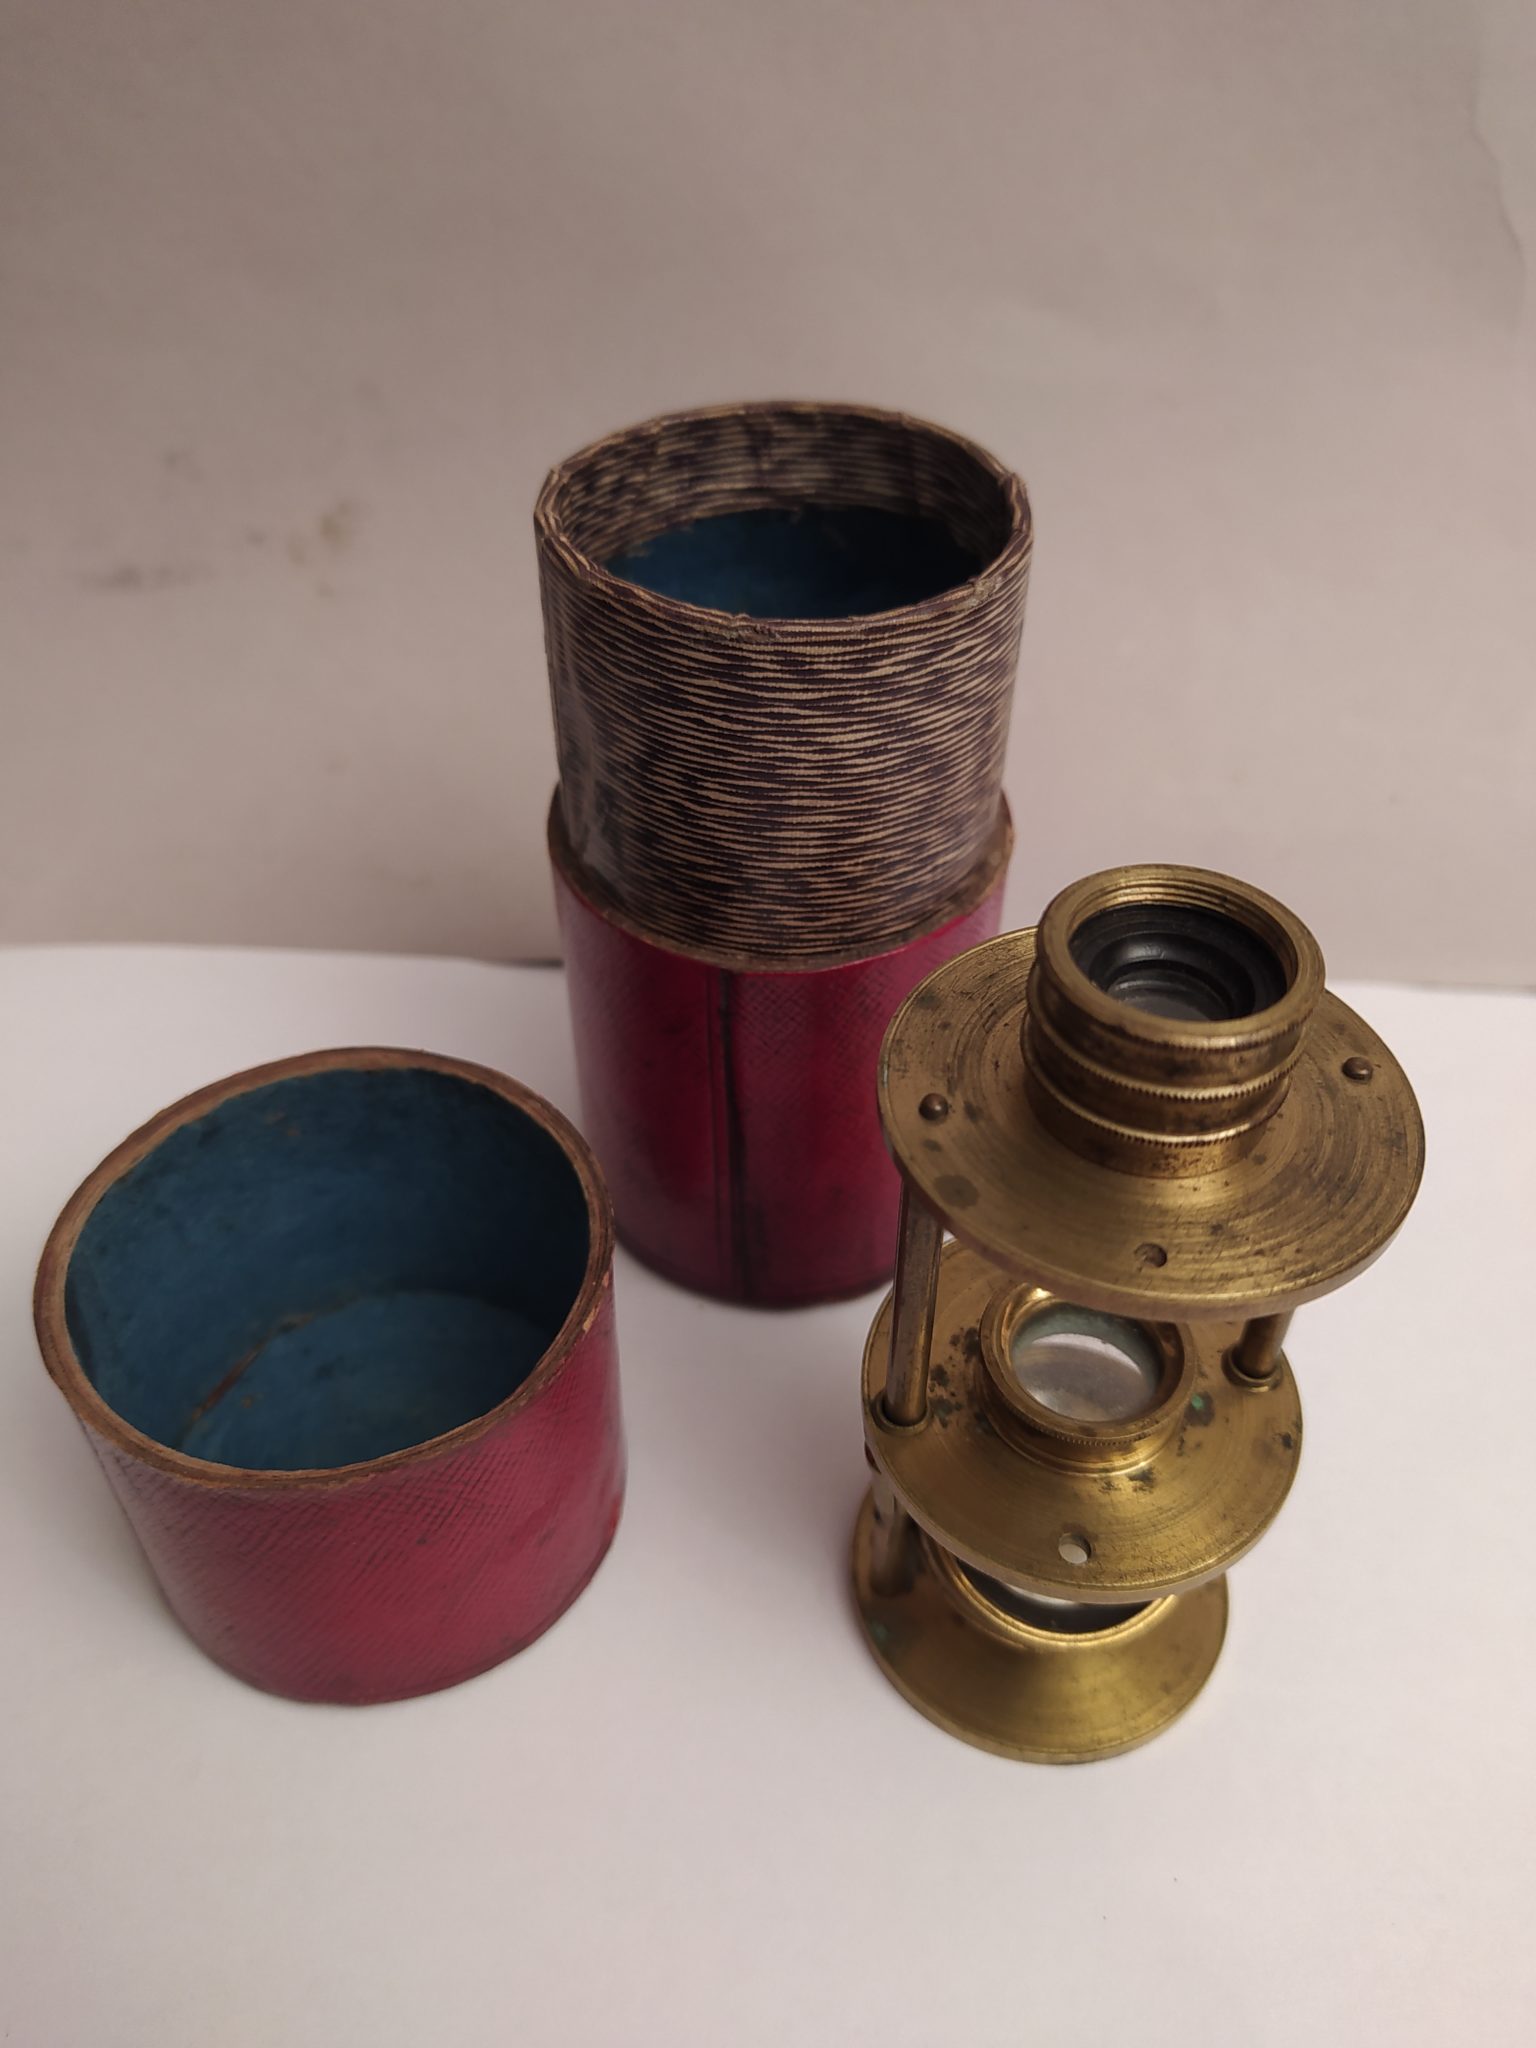 Early 19th Century “Withering cylindrical type” simple microscope